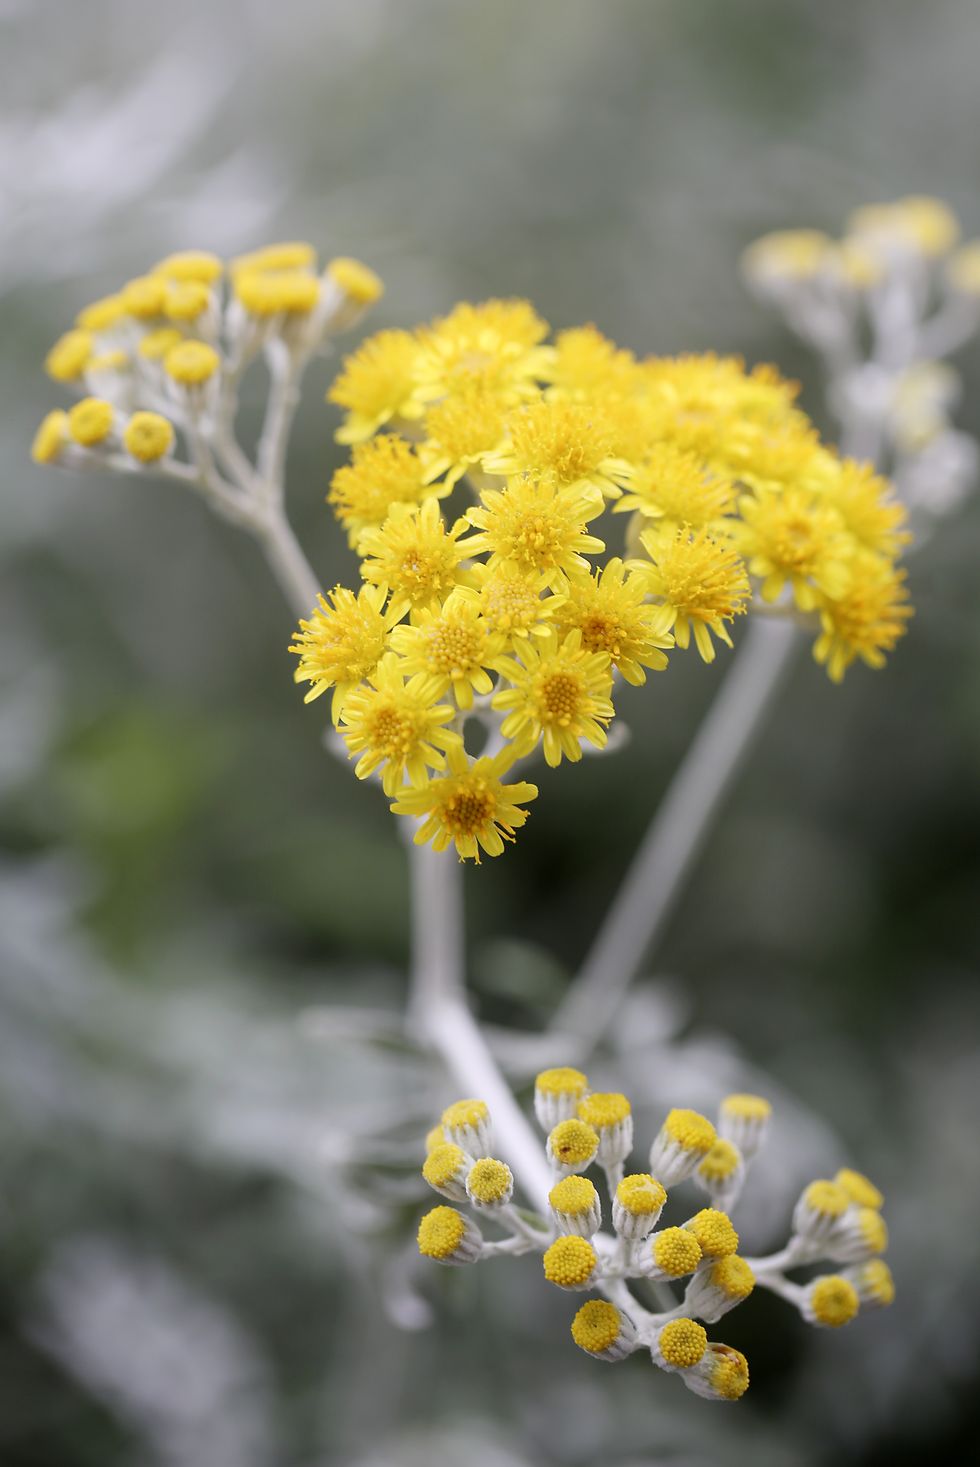 yellow dusty miller flowers with silver stems